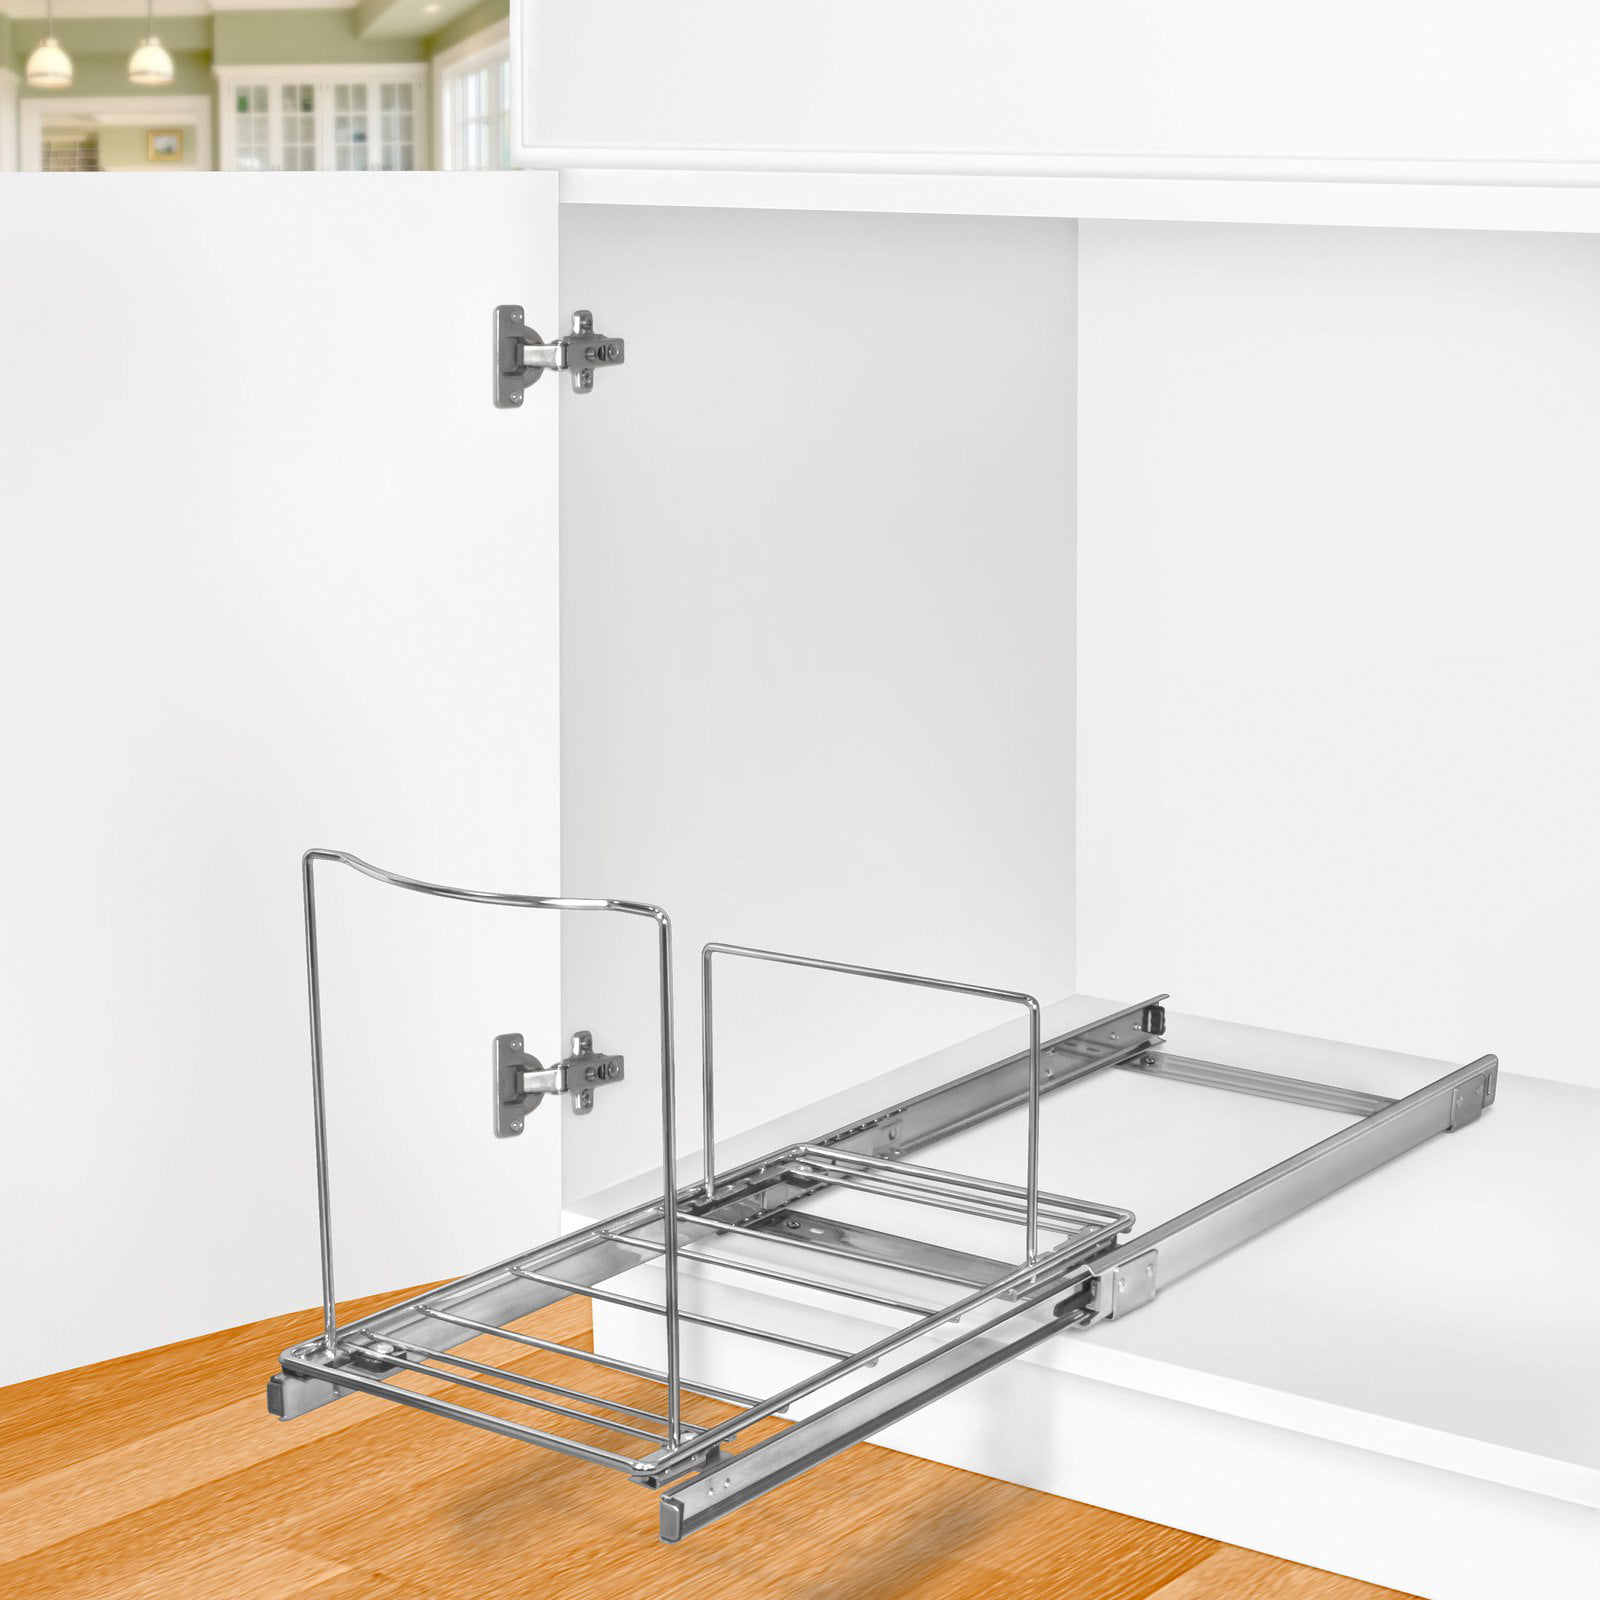 Giamo Pull Out Detergent Racks – Keep Under Sink Area Tidy